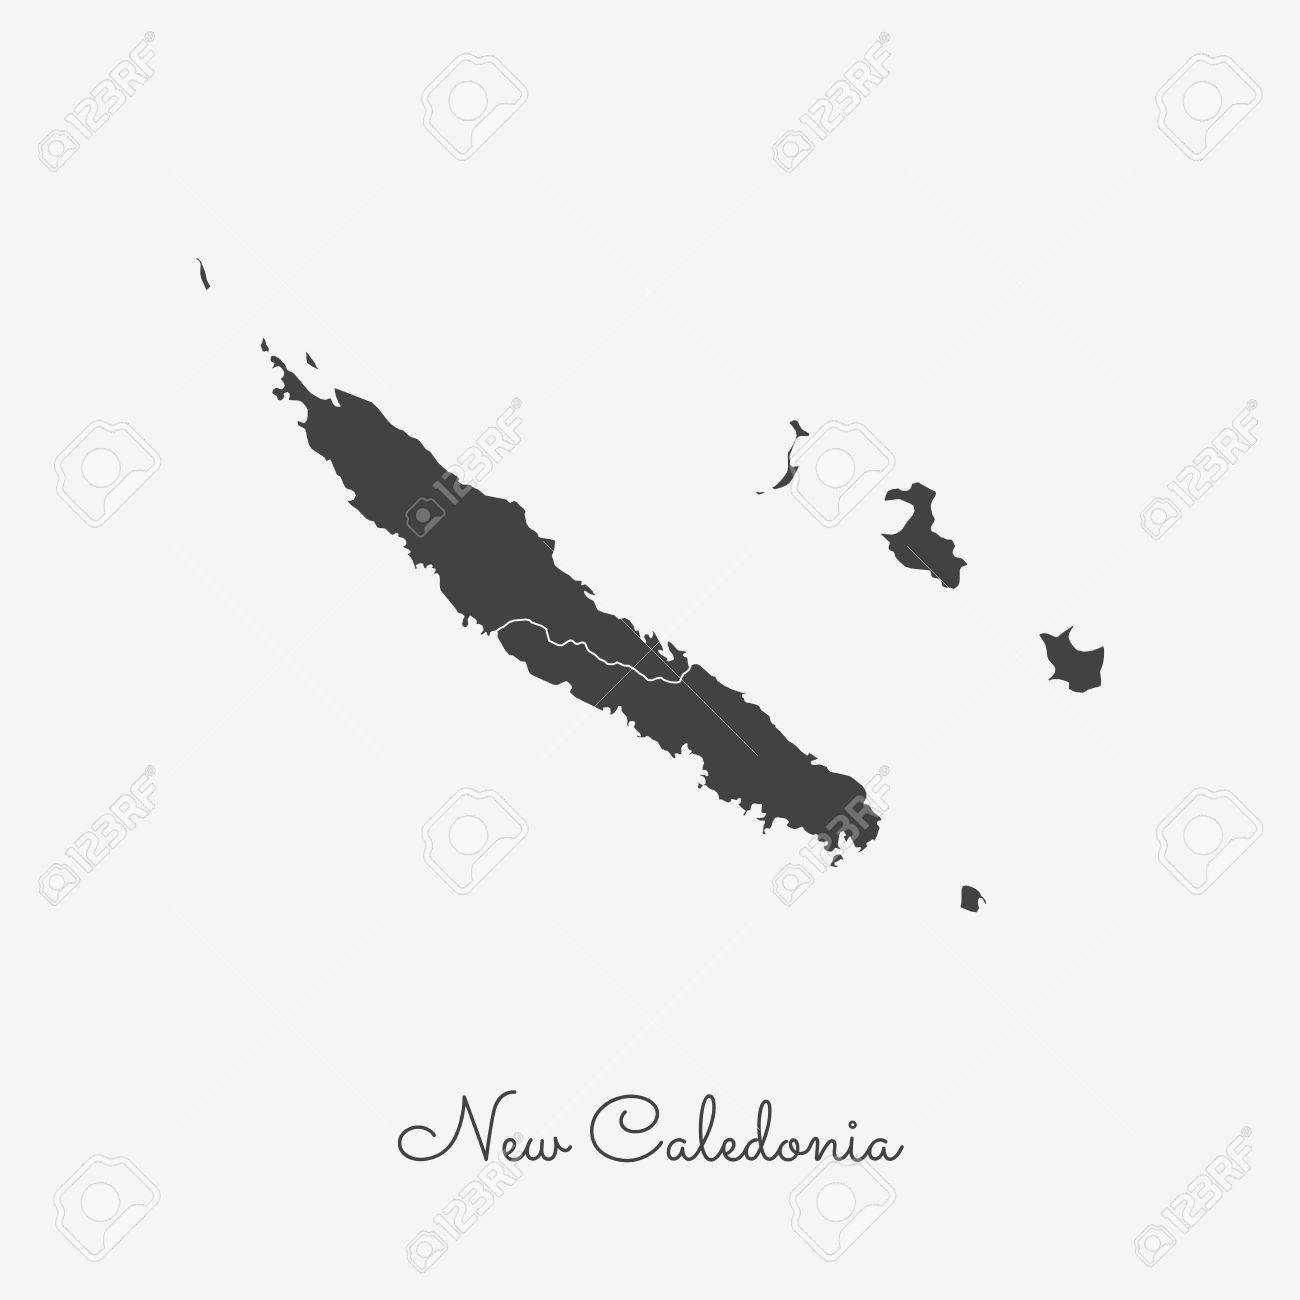 New Caledonia Region Map: Grey Outline On White Background. Detailed.. intérieur Carte Nouvelle Region 